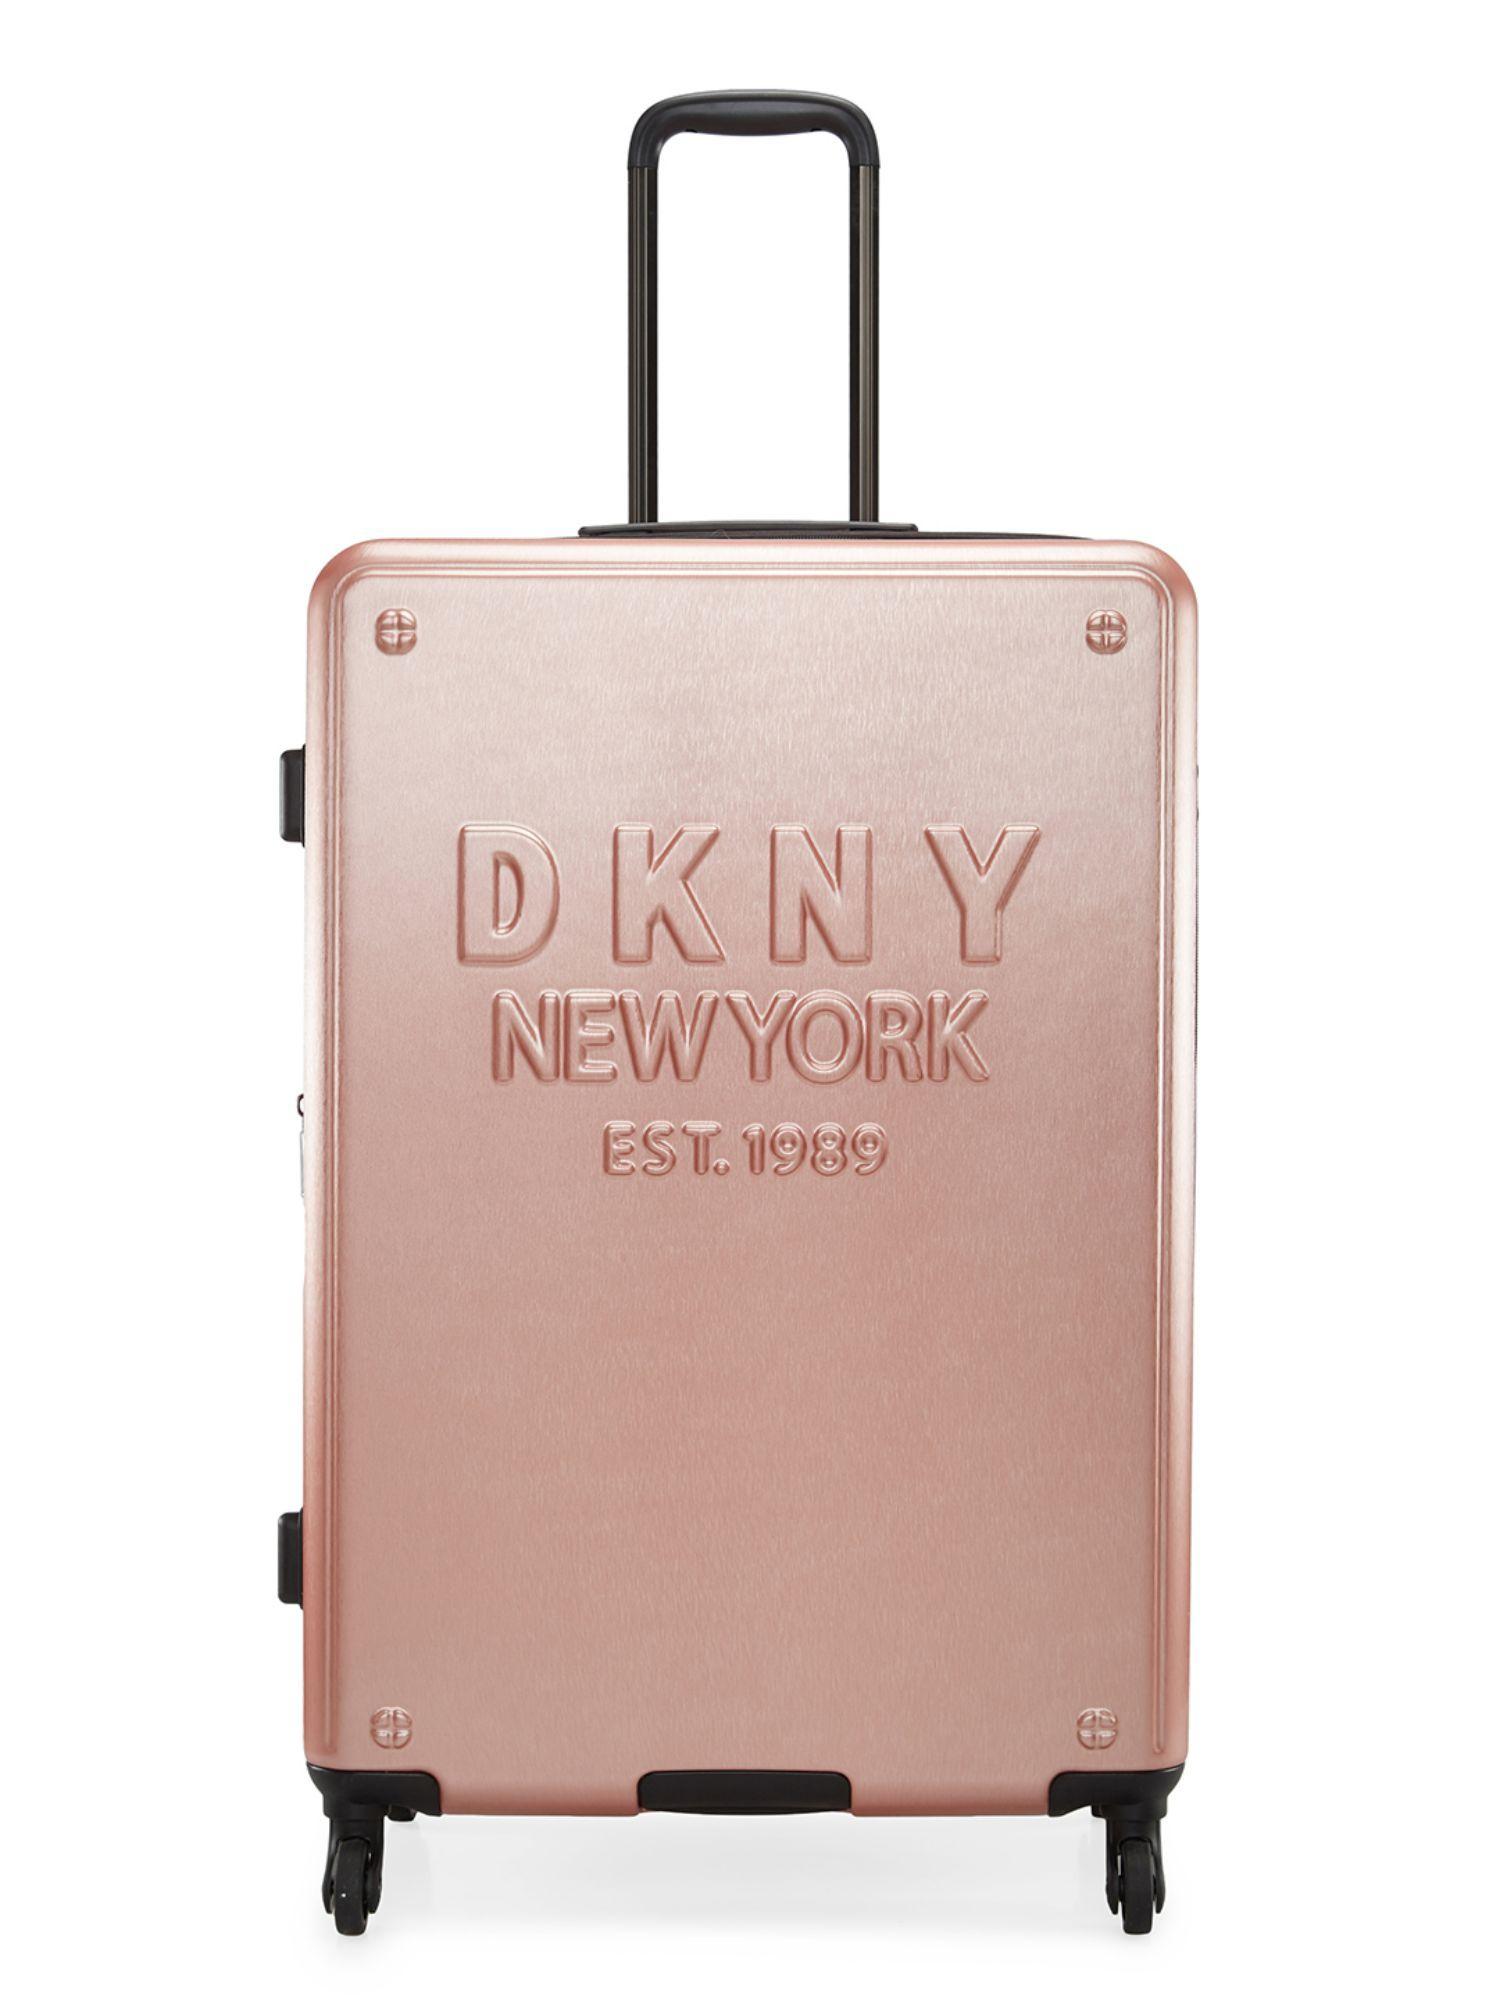 new yorker rose gold matallic color abs material hard 20 inches cabin size trolley